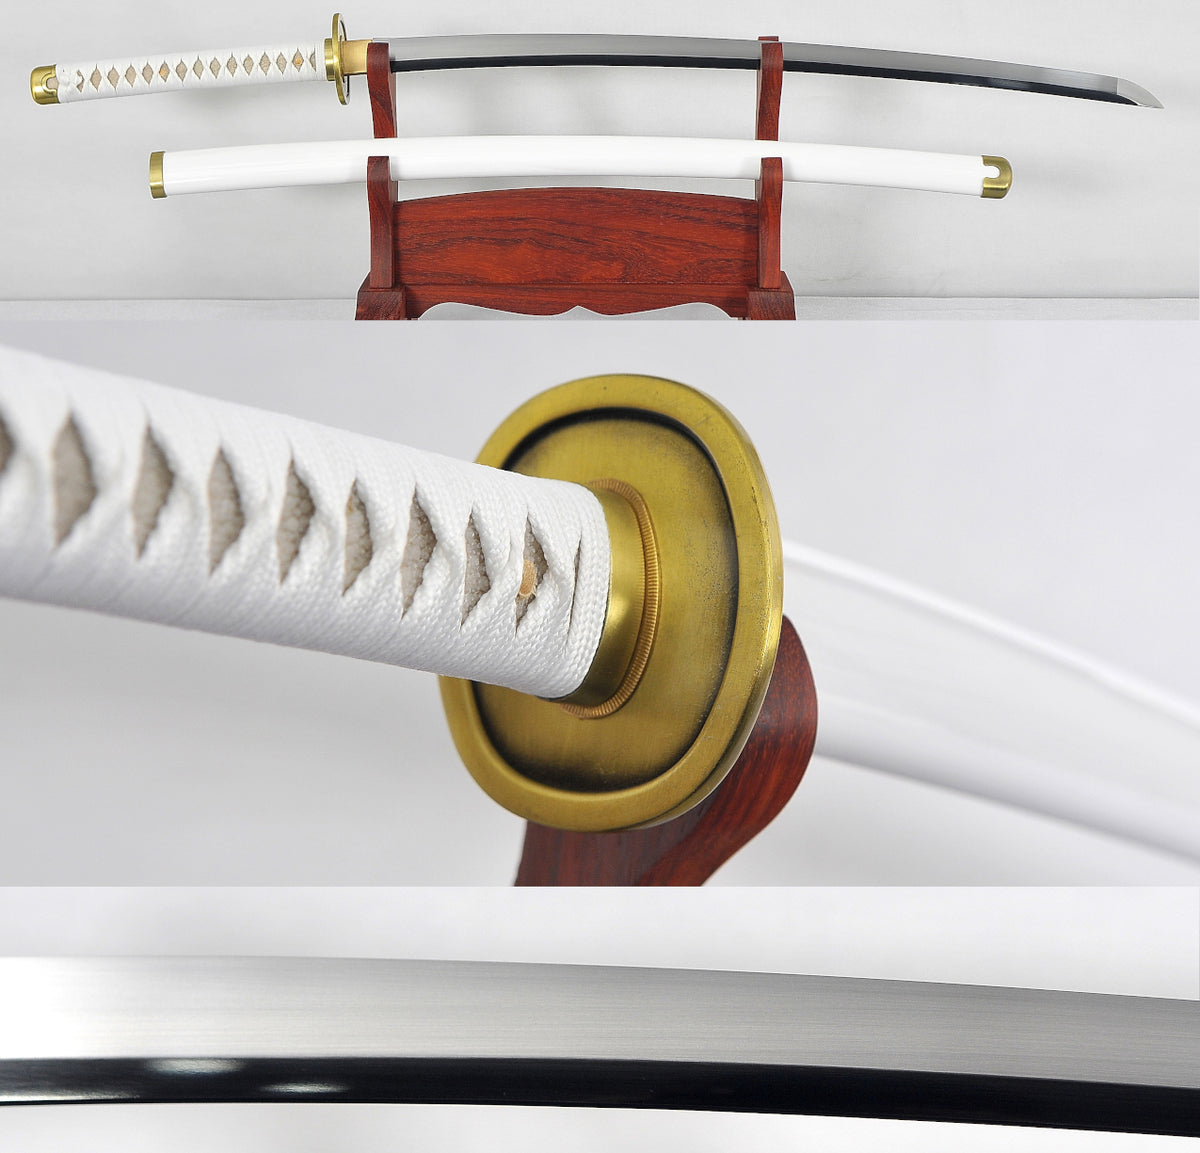 How to make a Zoro Katana out of paper, One Piece